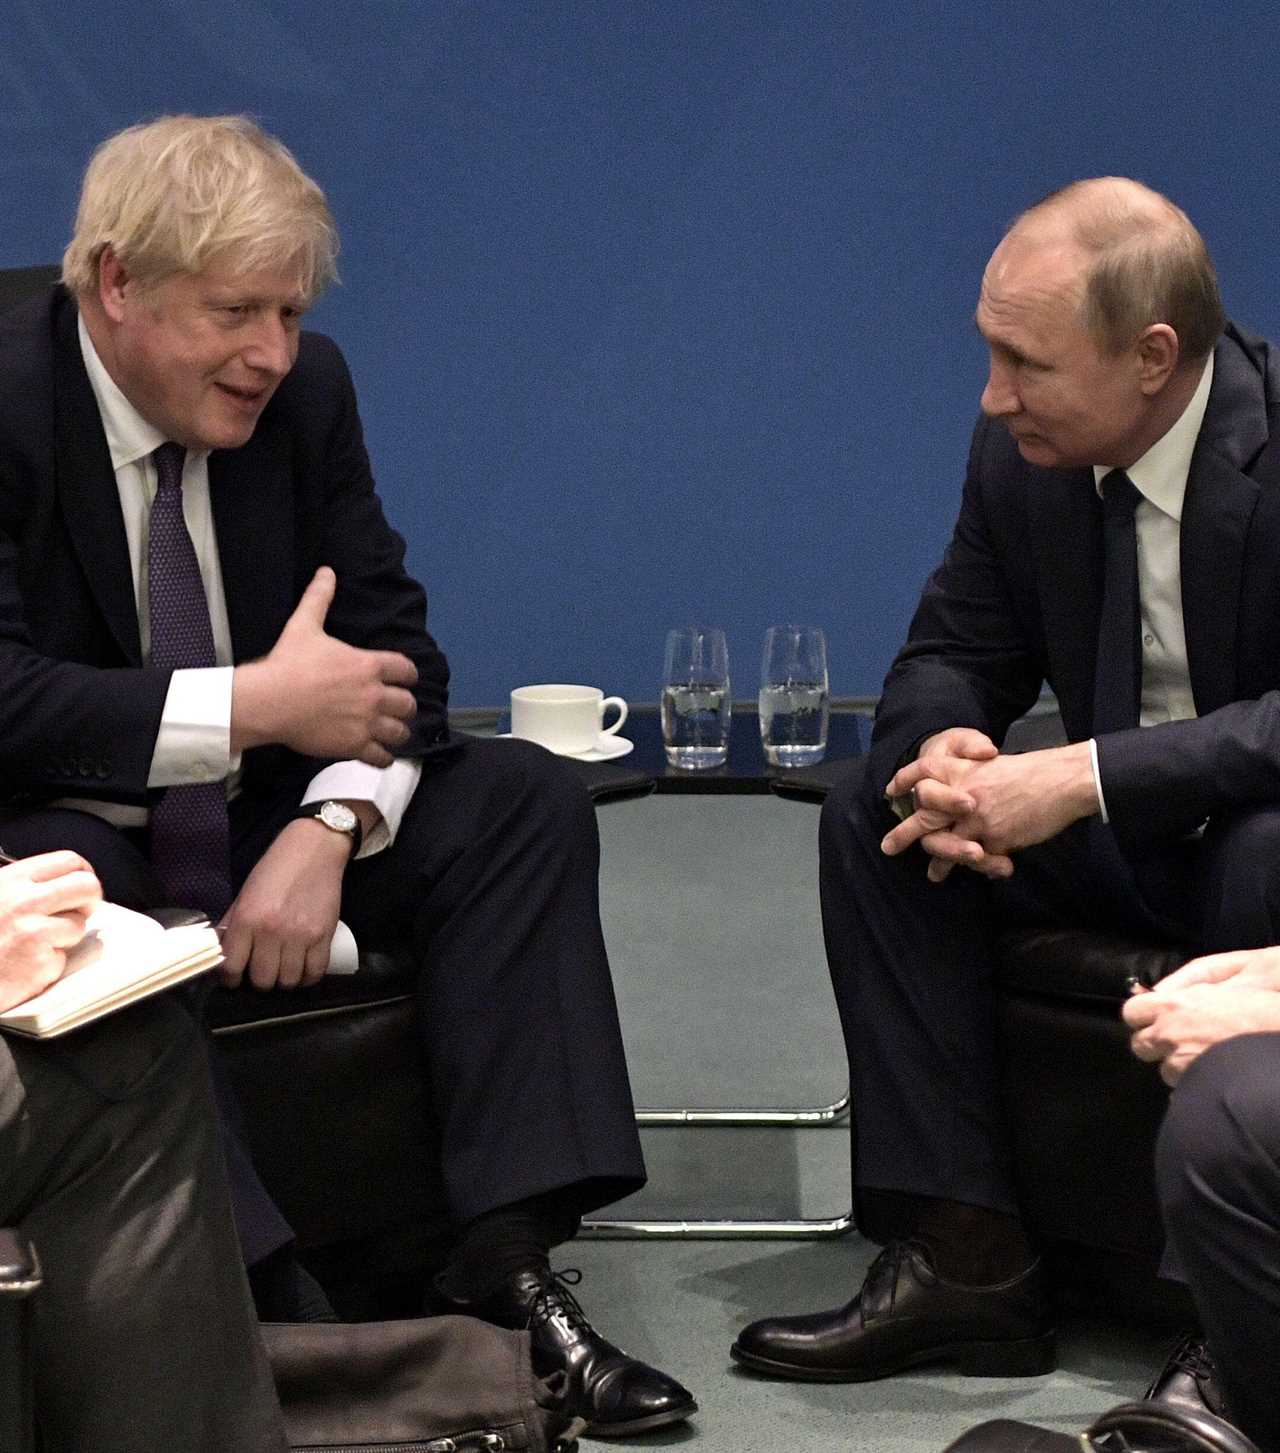 Vladimir Putin threatened he could kill me with a missile attack, reveals Boris Johnson in hard-hitting new BBC series